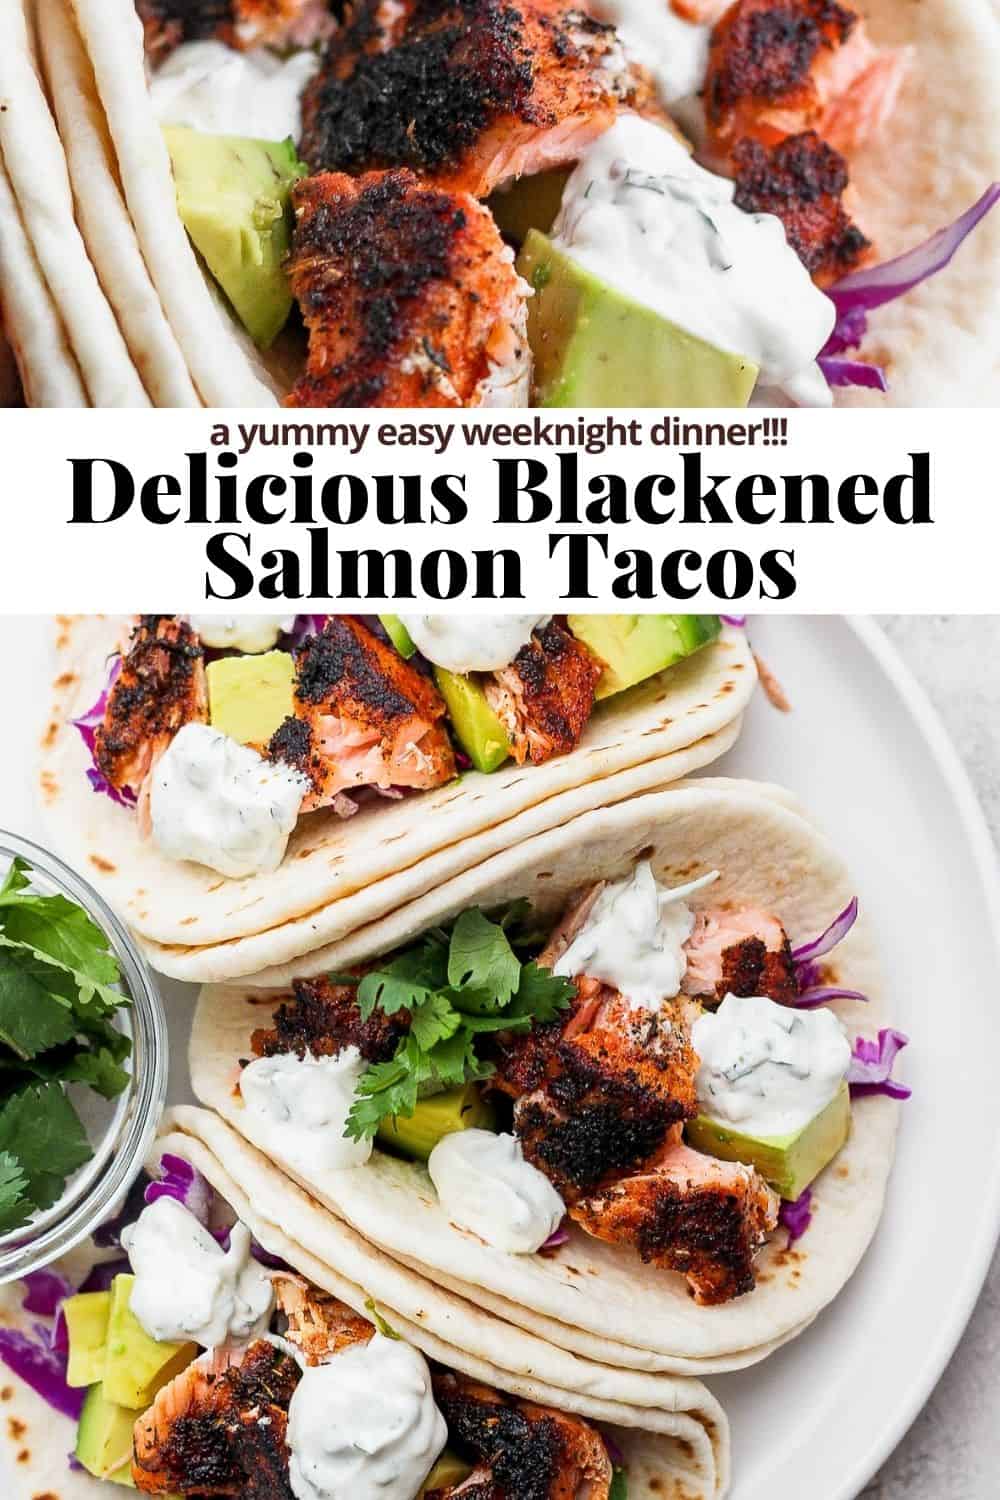 Pinterest image for delicious blackened salmon tacos.